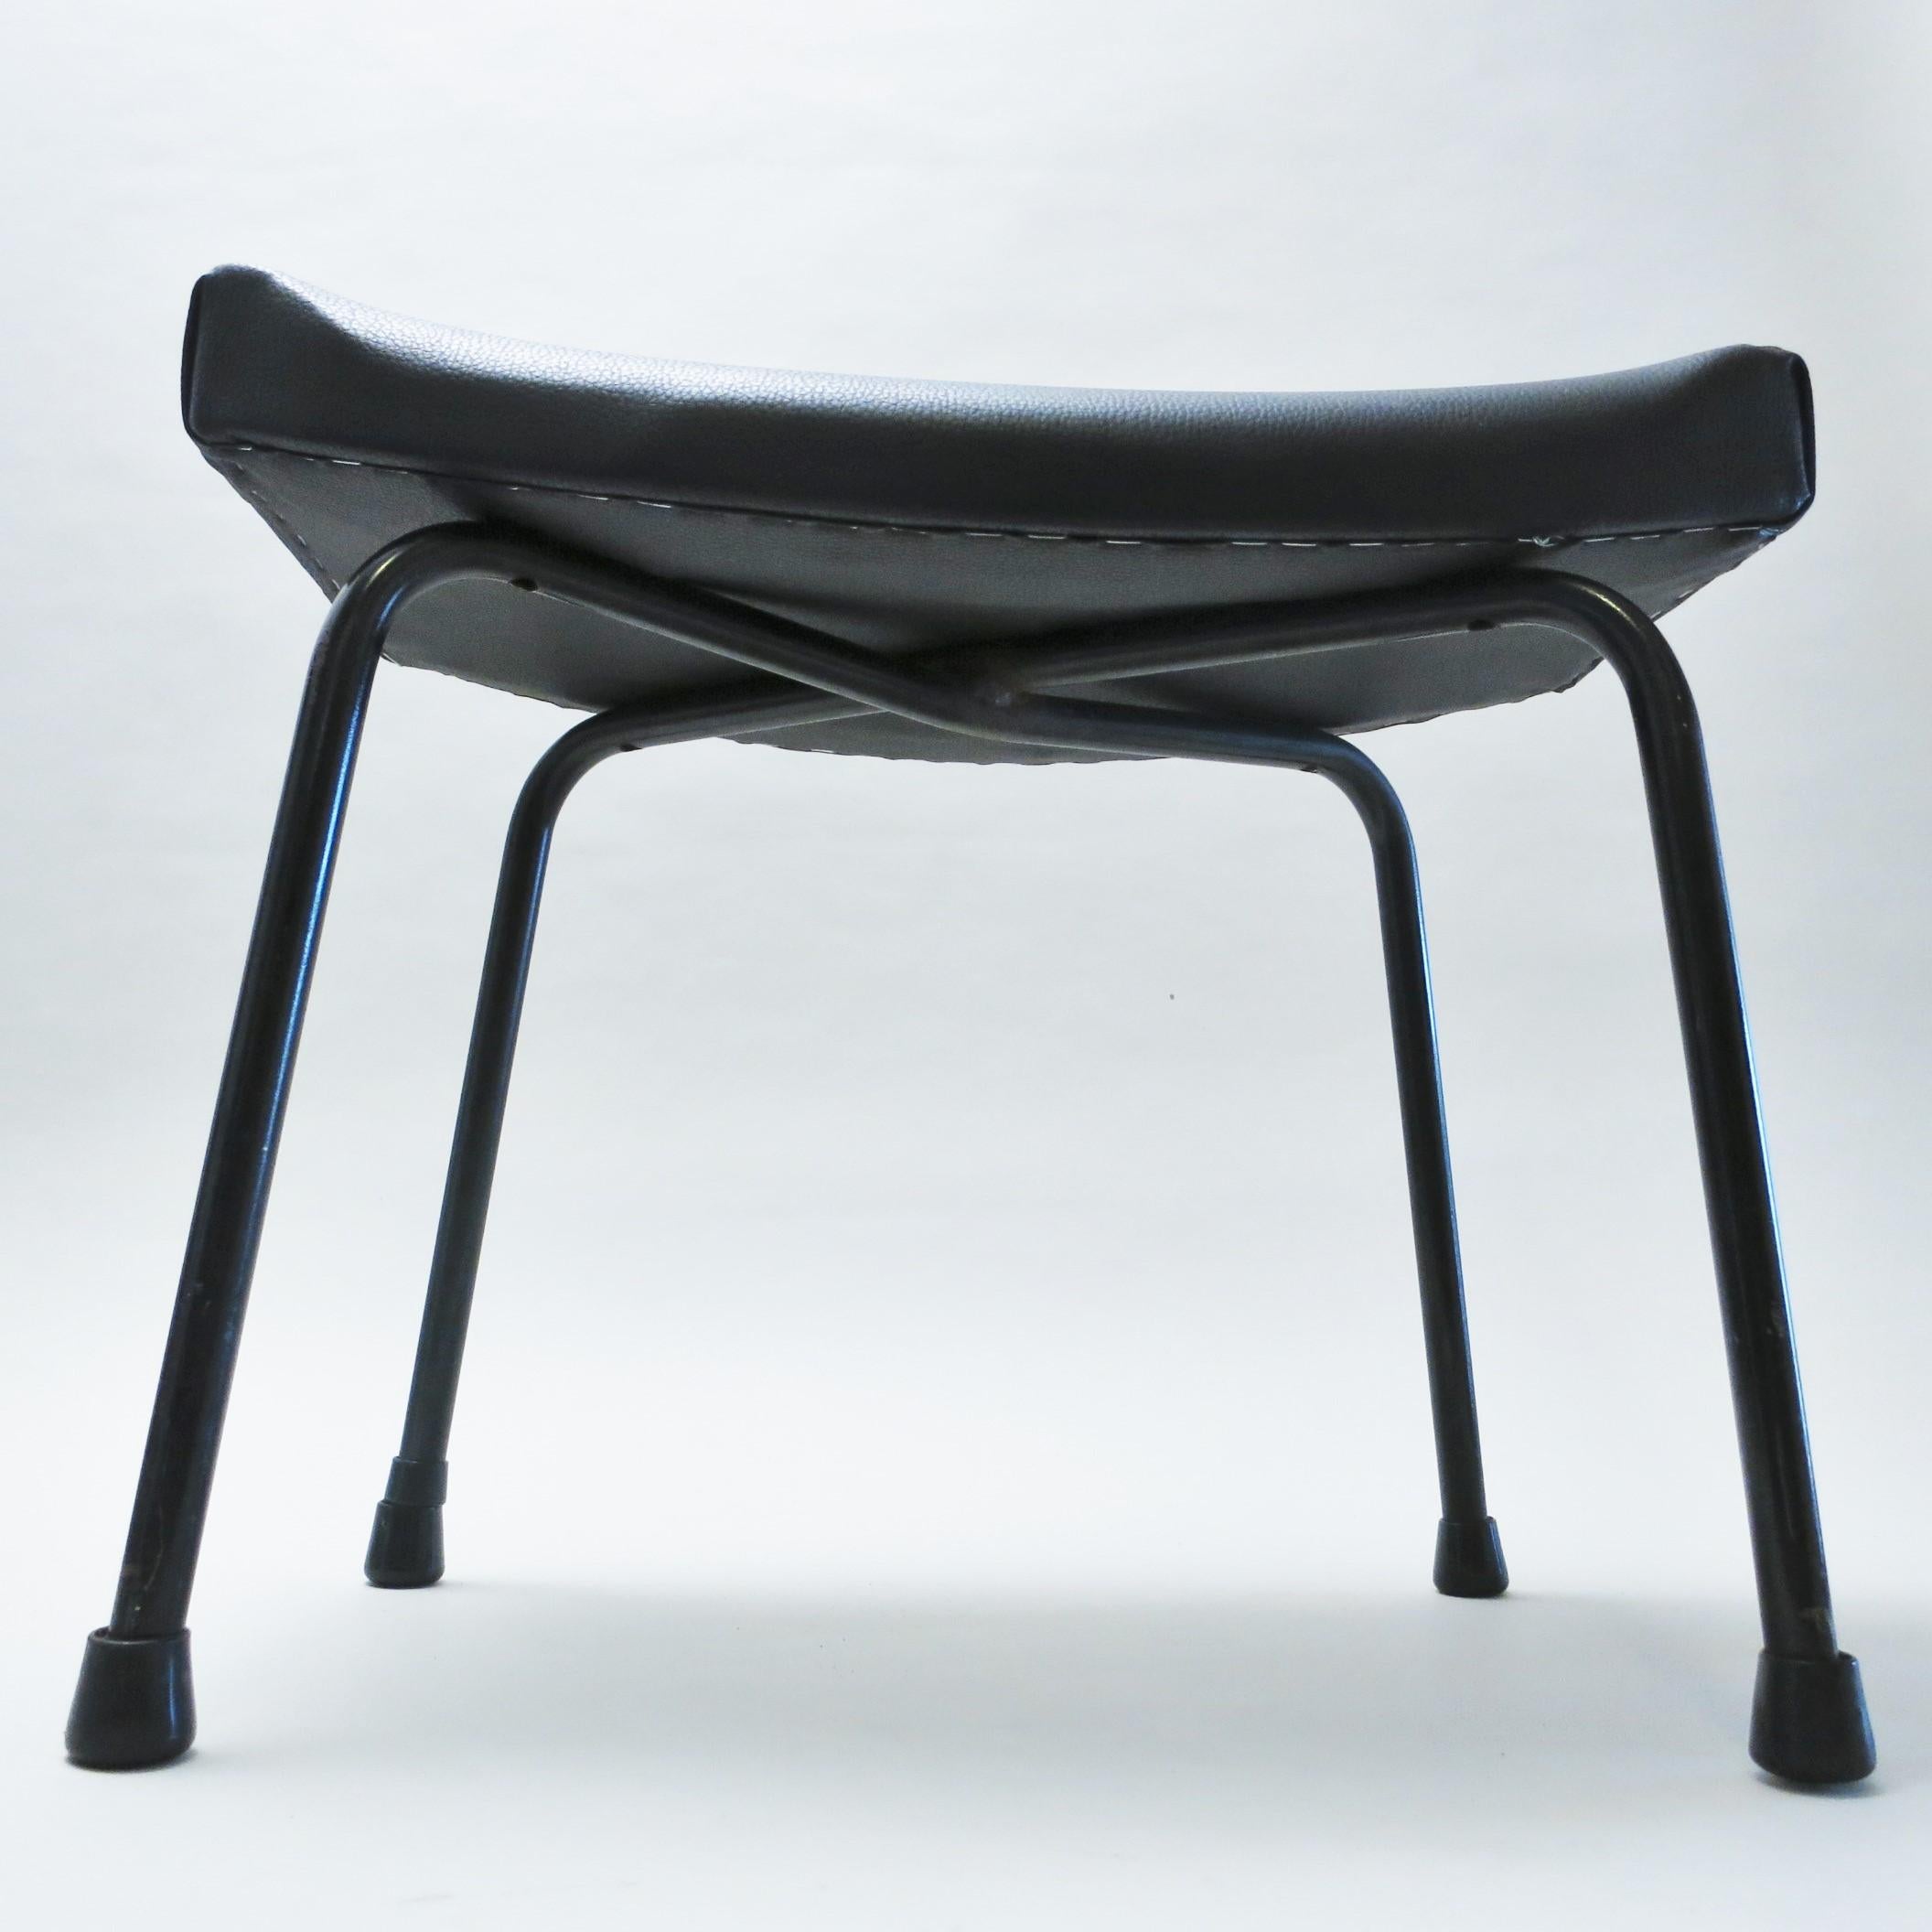 Mid-20th Century French Mid-Century Modern Stool Taureau by Pierre Guariche, 1950s For Sale